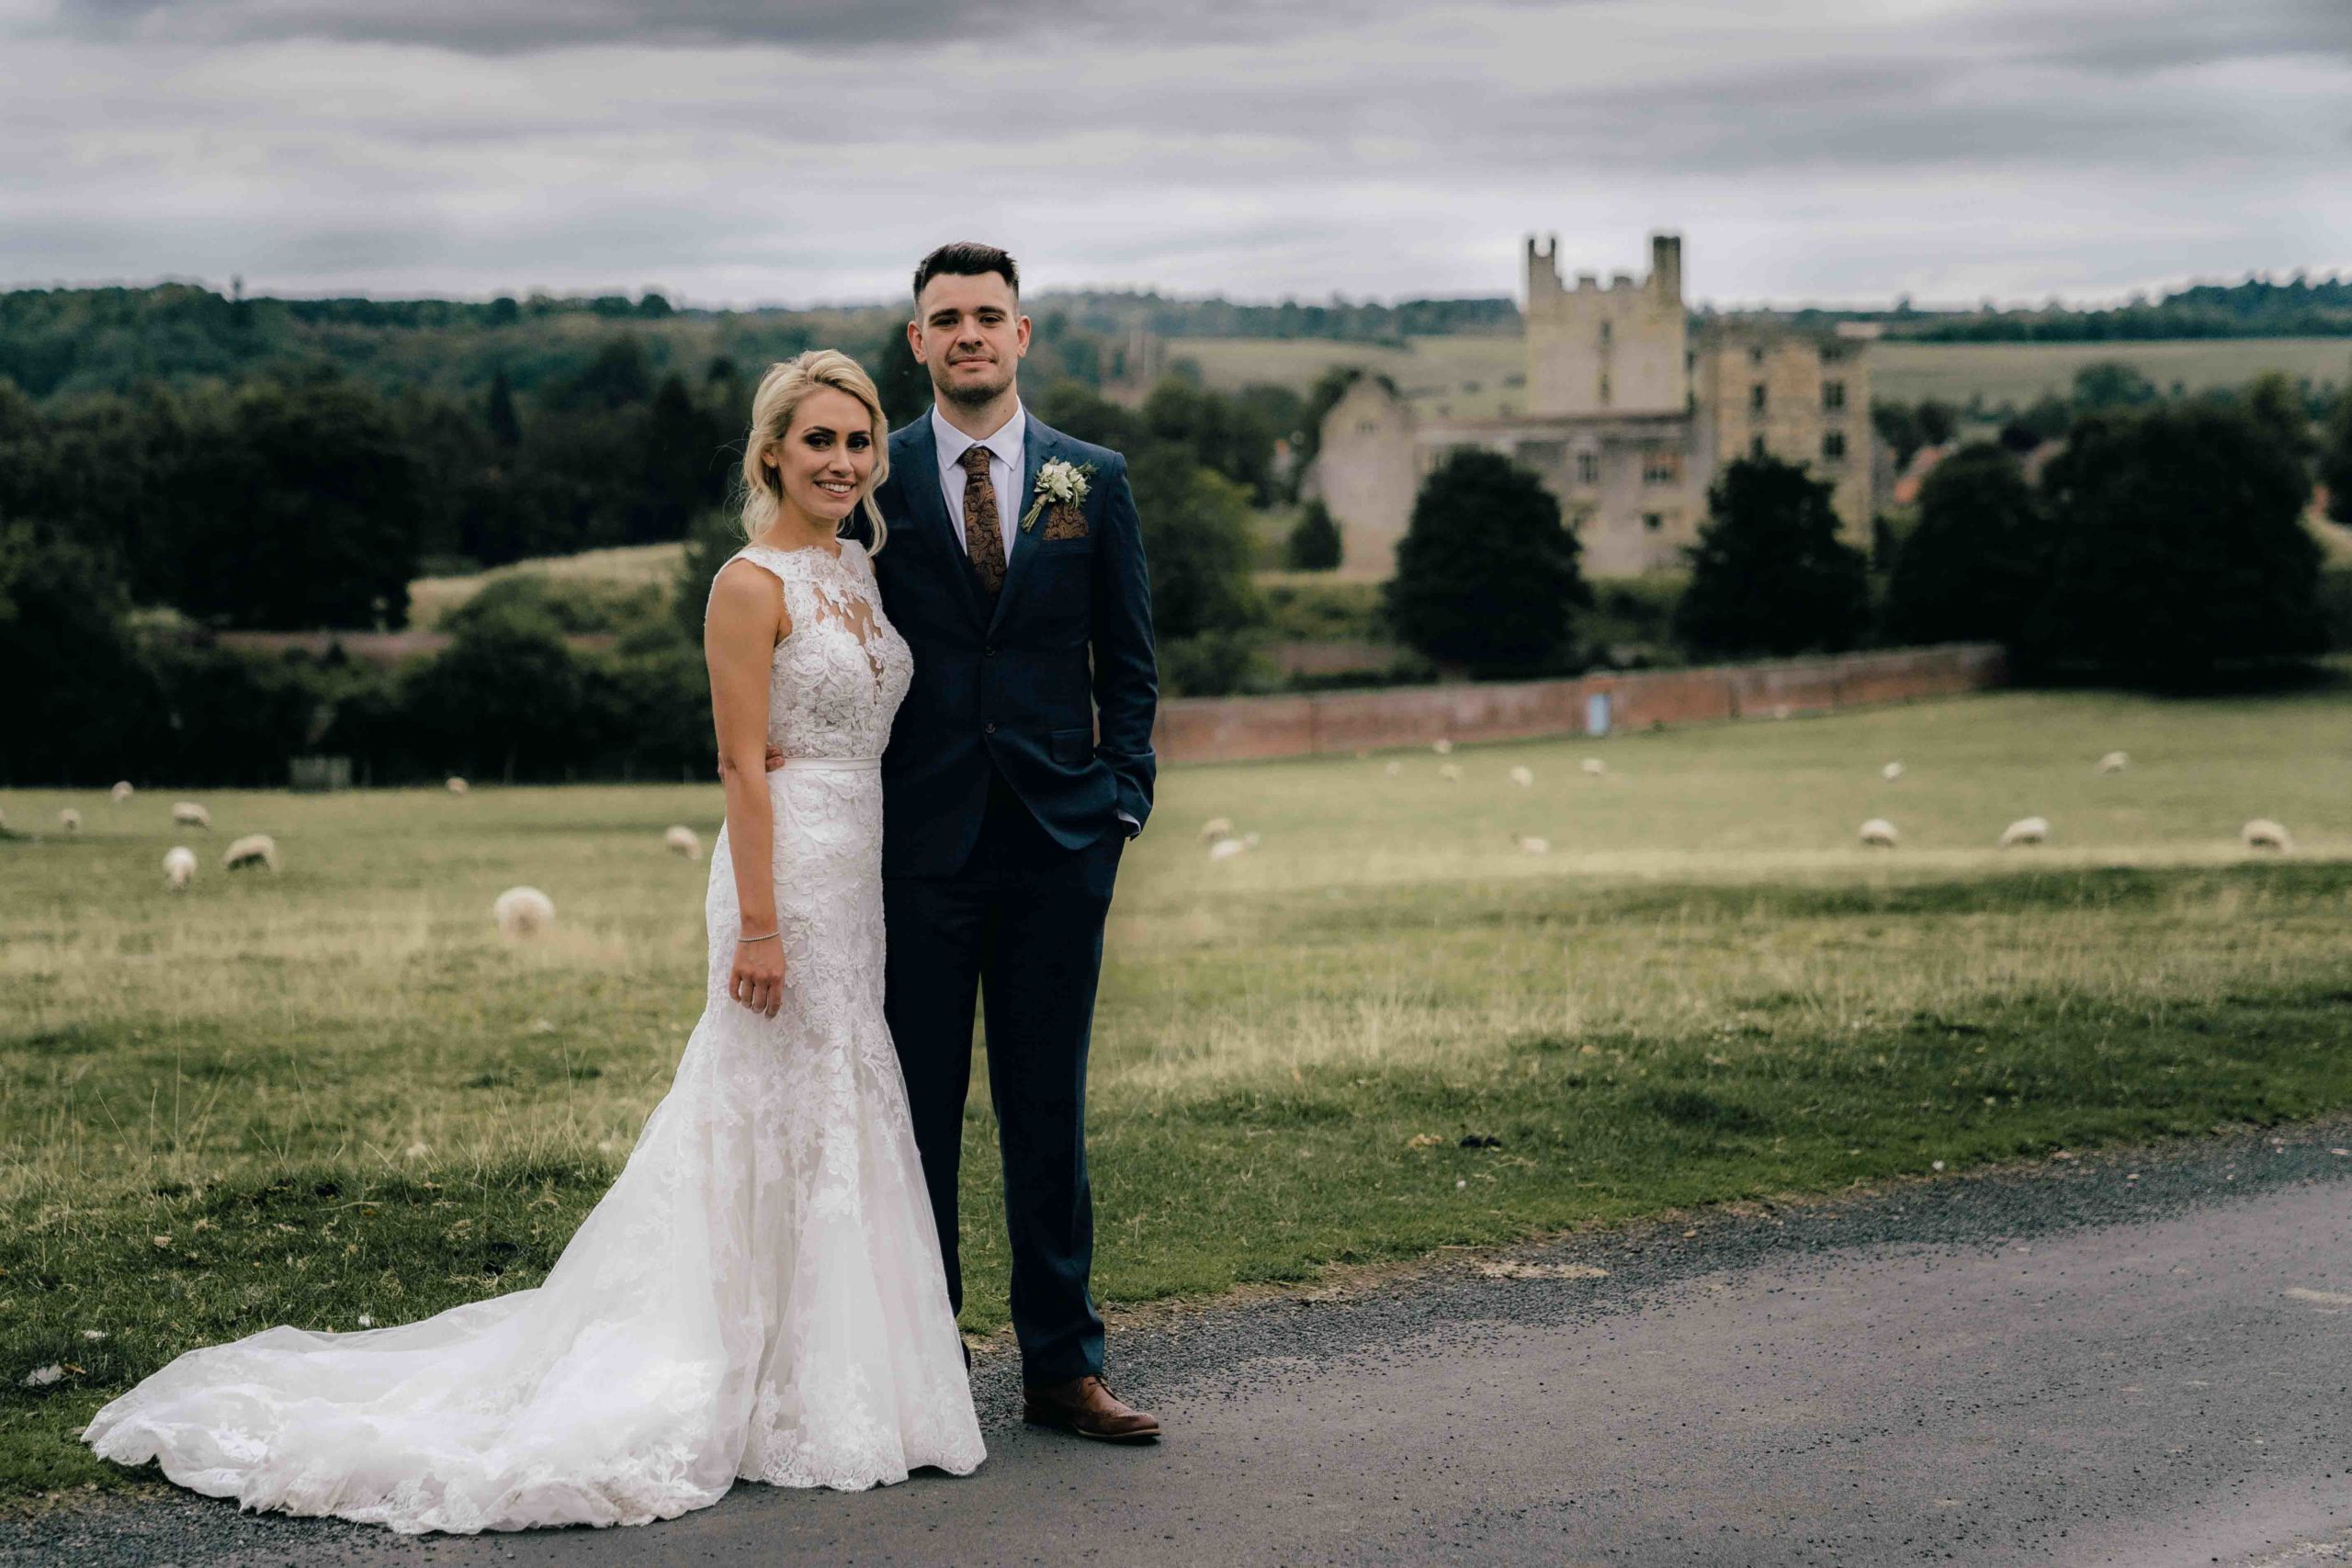 A Yorkshire wedding photographer and videographer